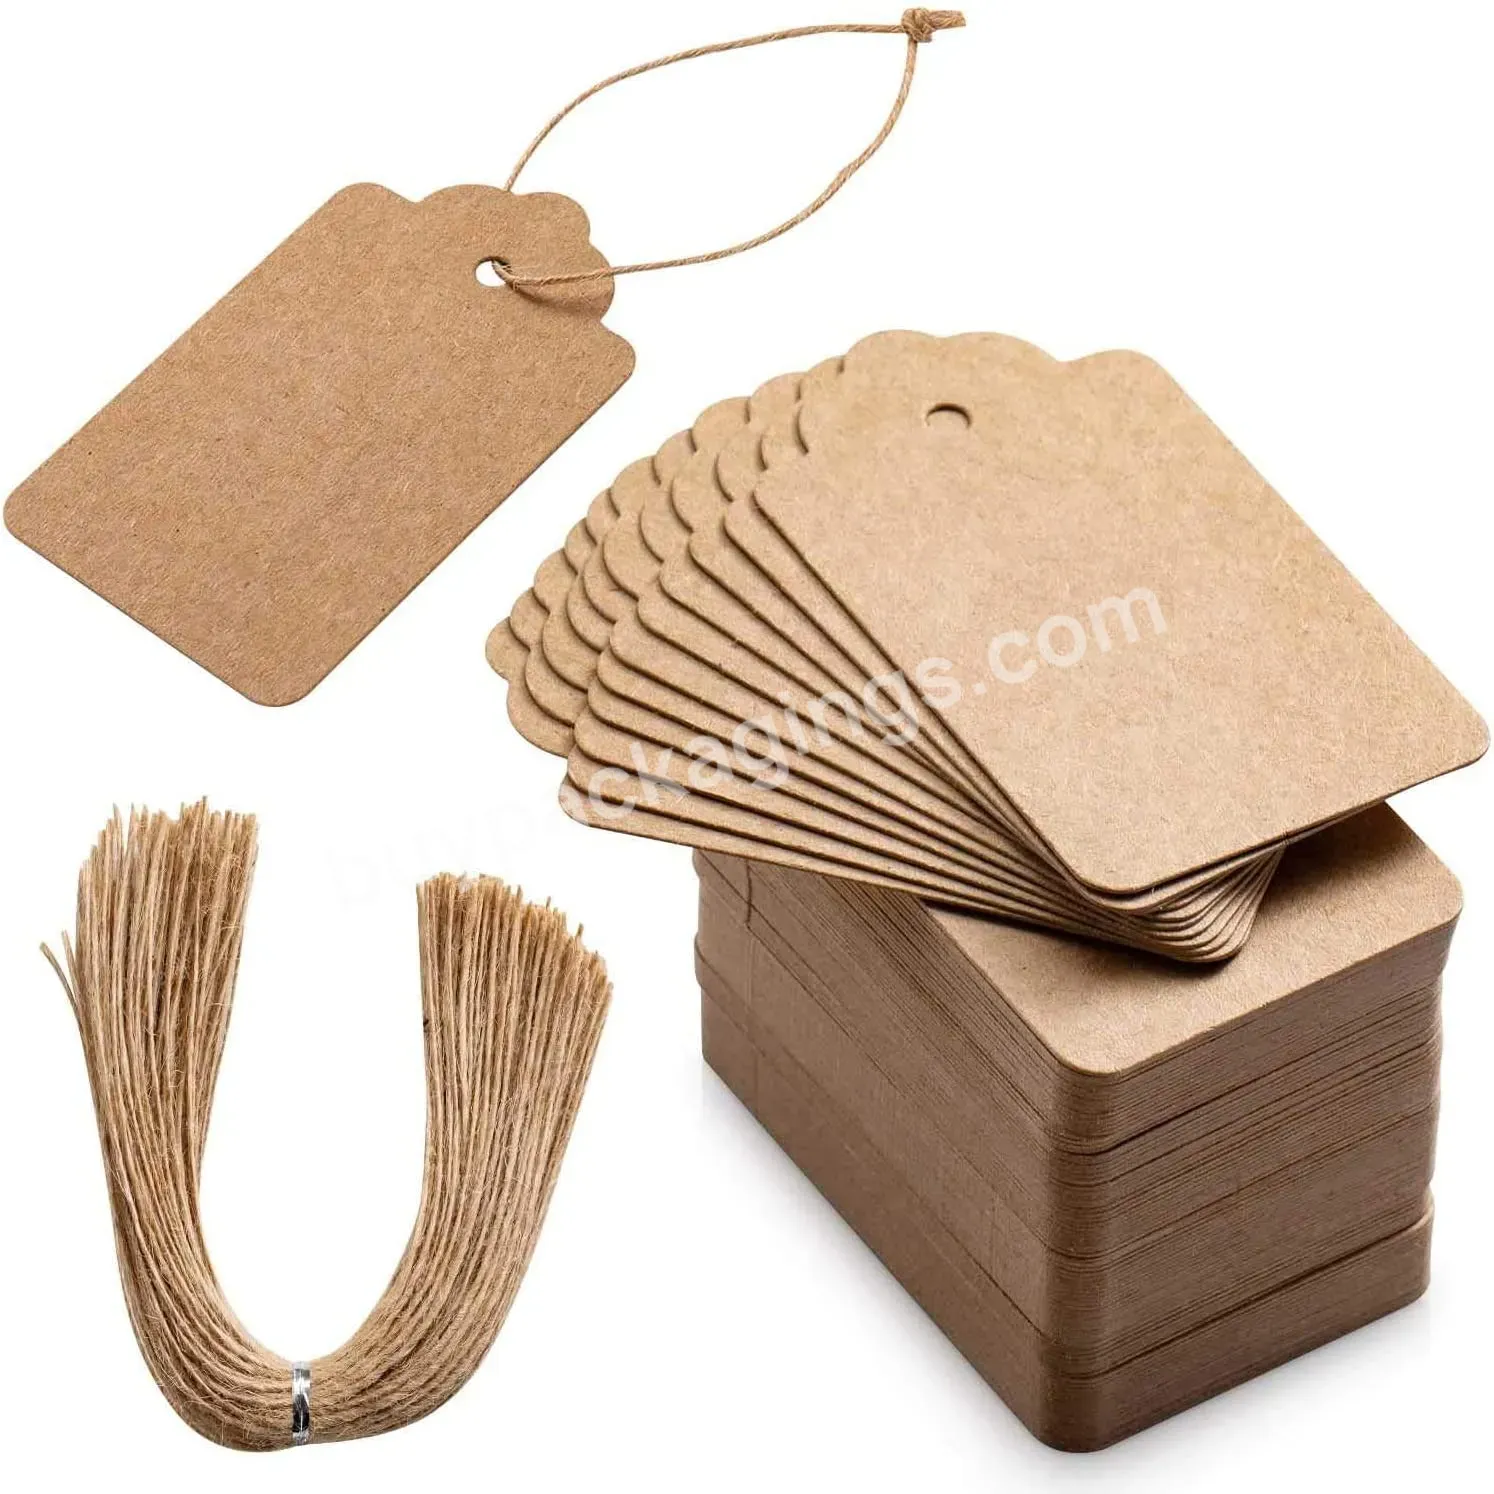 Hot Selling Kraft Paper Price Tags Craft Tags Labels Jewelry Tags With String For Wedding Christmas Day Thanksgiving - Buy Gift Tags For Wedding Christmas Day Thanksgiving,Swing Hang Paper Tag,Kraft Paper Gift Tag.